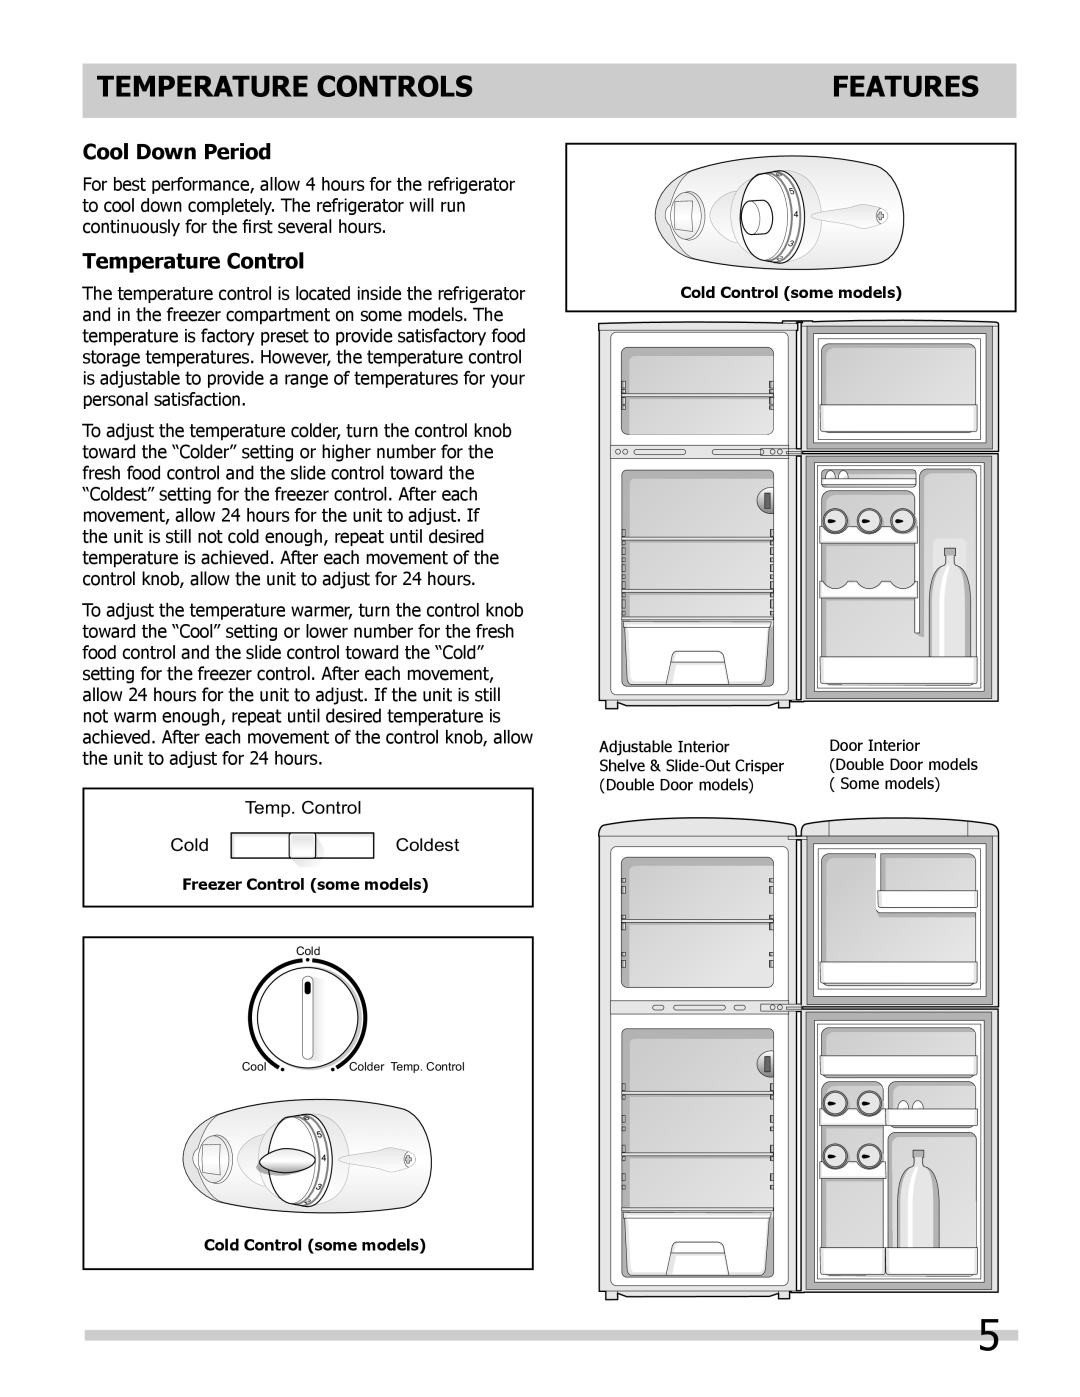 Frigidaire FFPH44M4LB, FFPH25M4LB, FFPH31M6LM, FFPH44M4LM, 241607805 Temperature Controls, Features, Cool Down Period 